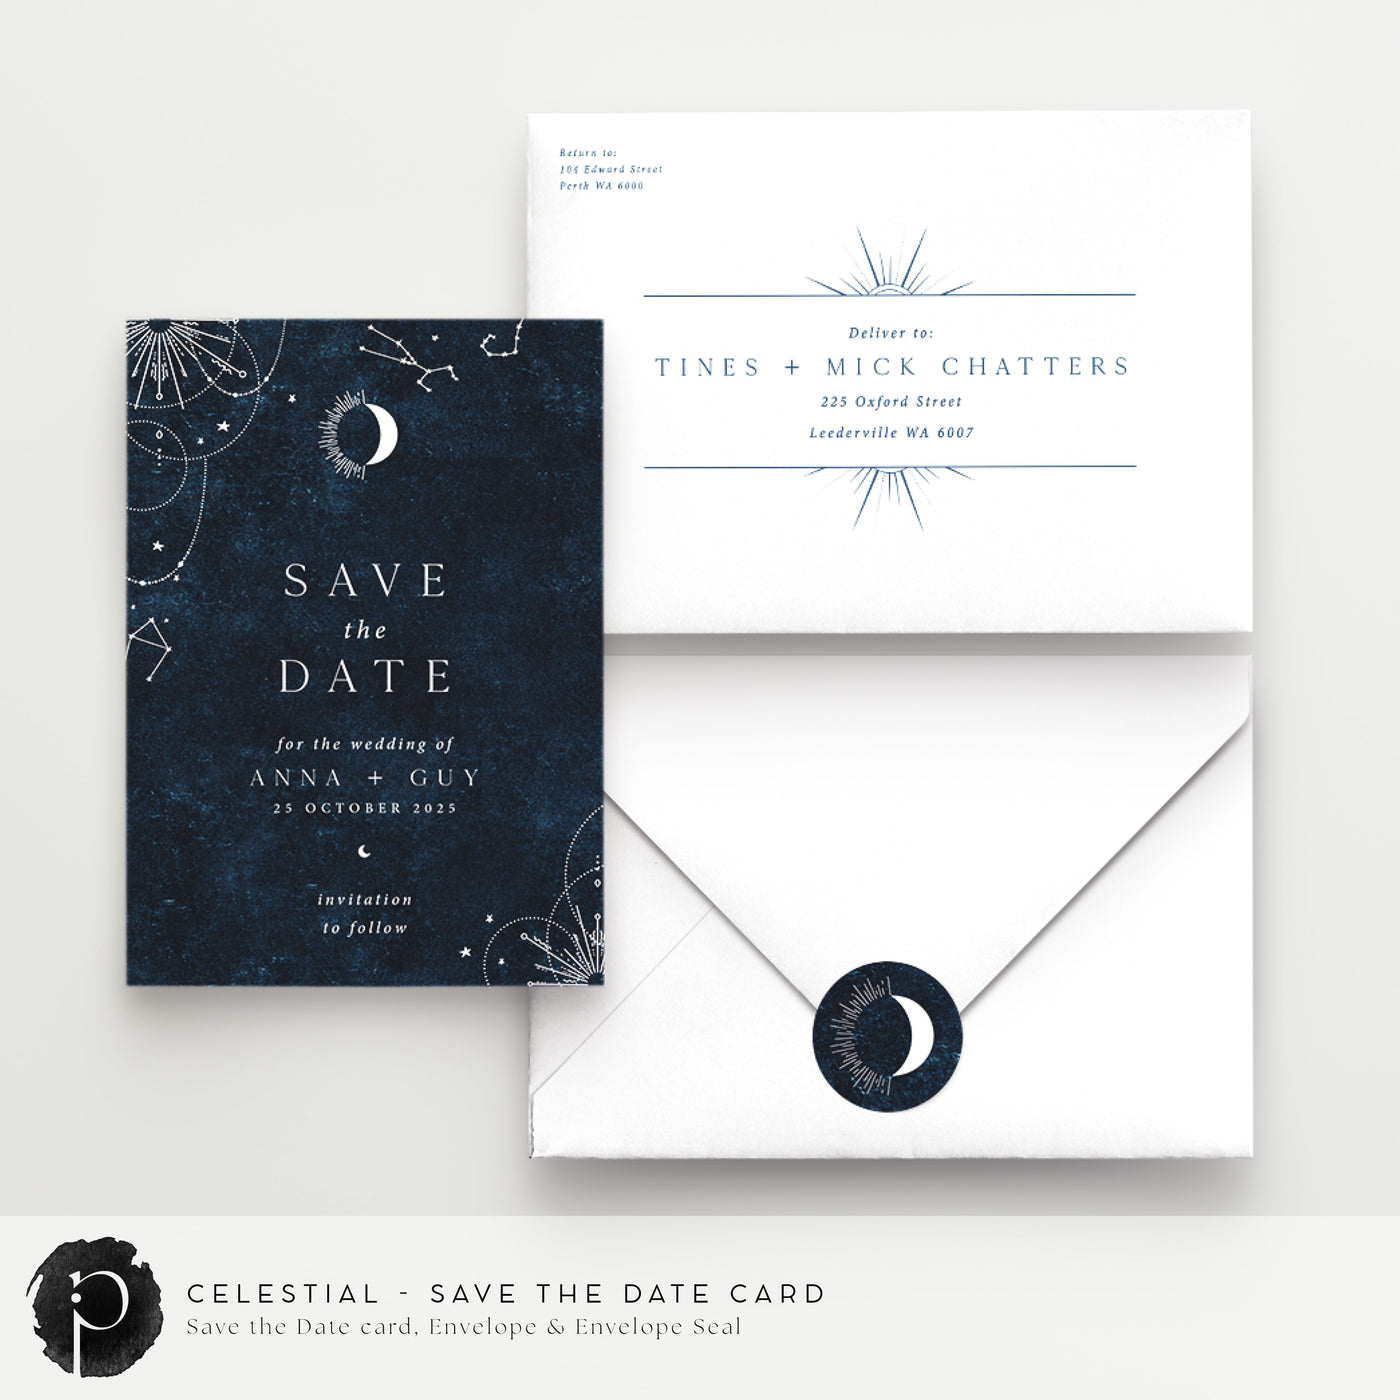 Celestial - Save The Date Cards